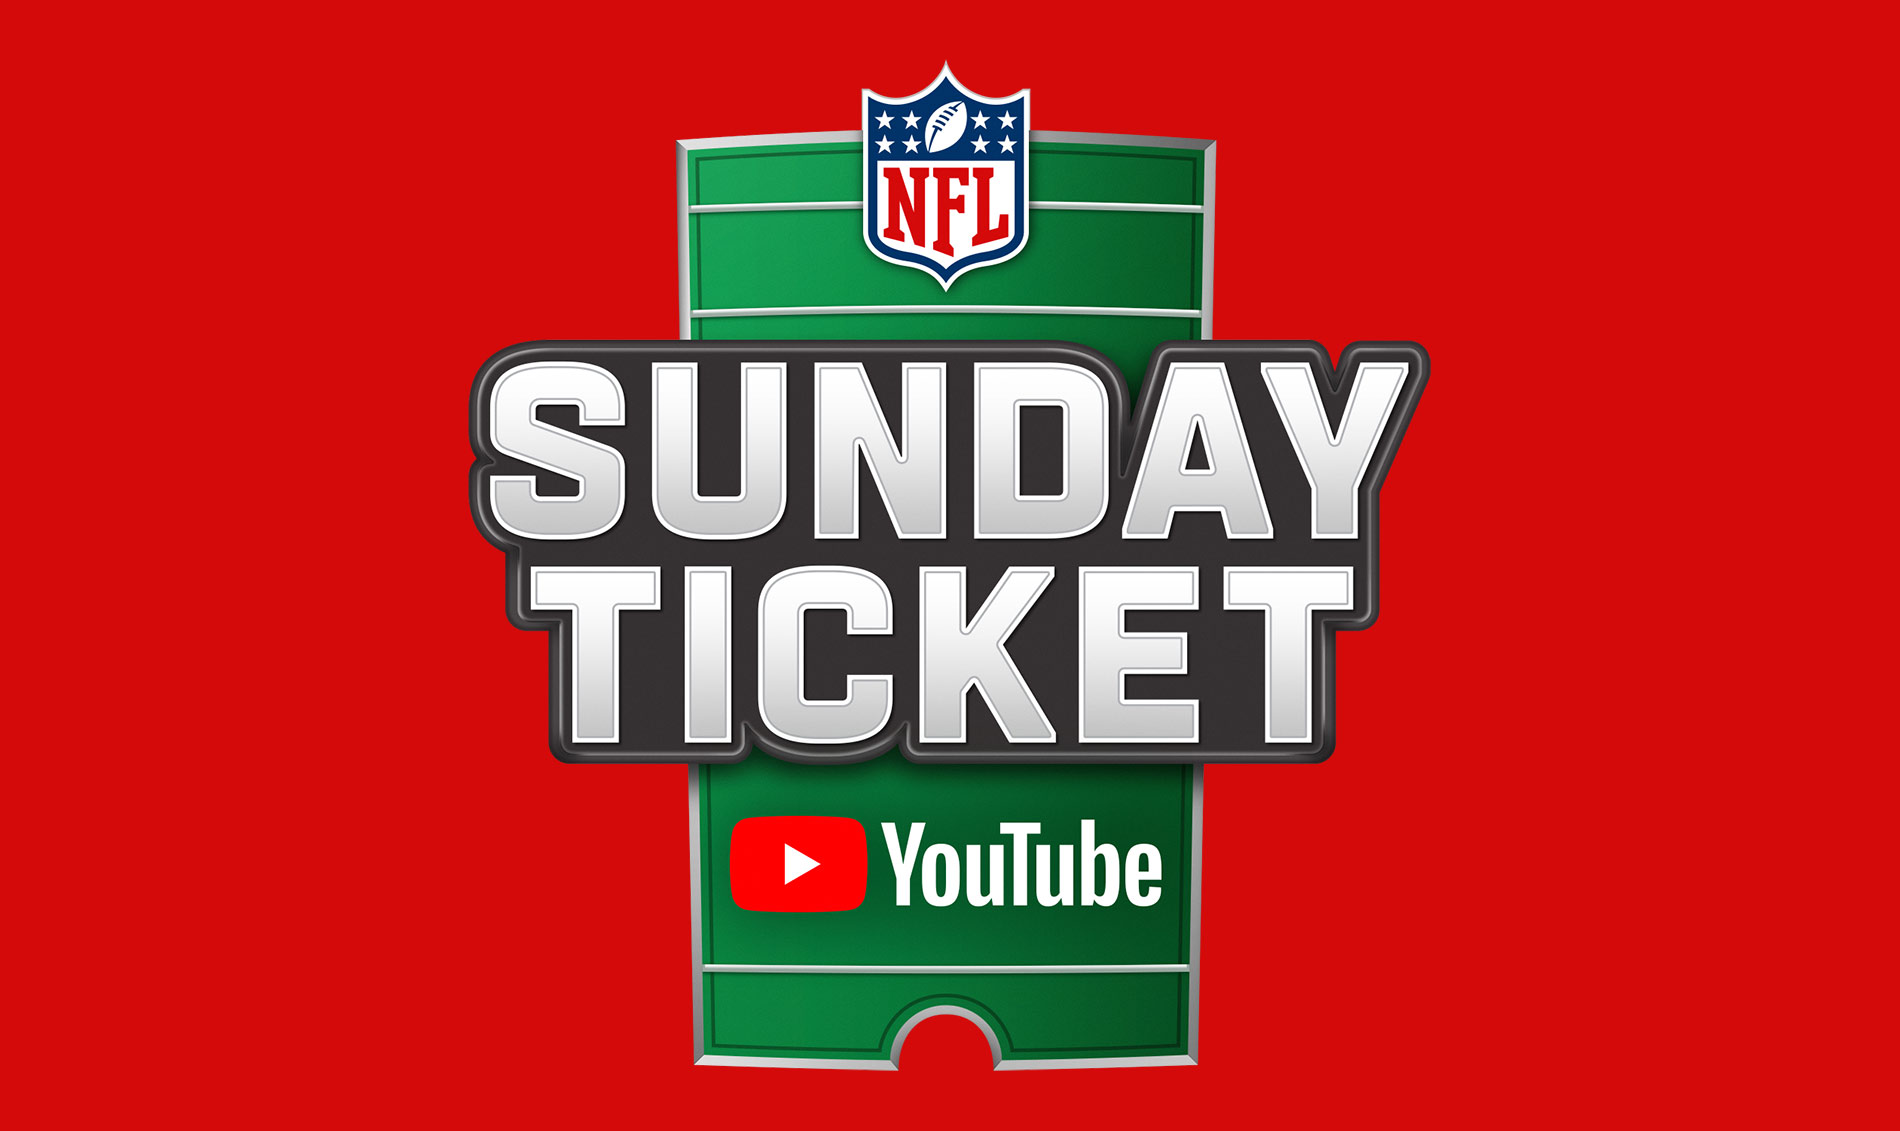 nfl and sunday ticket